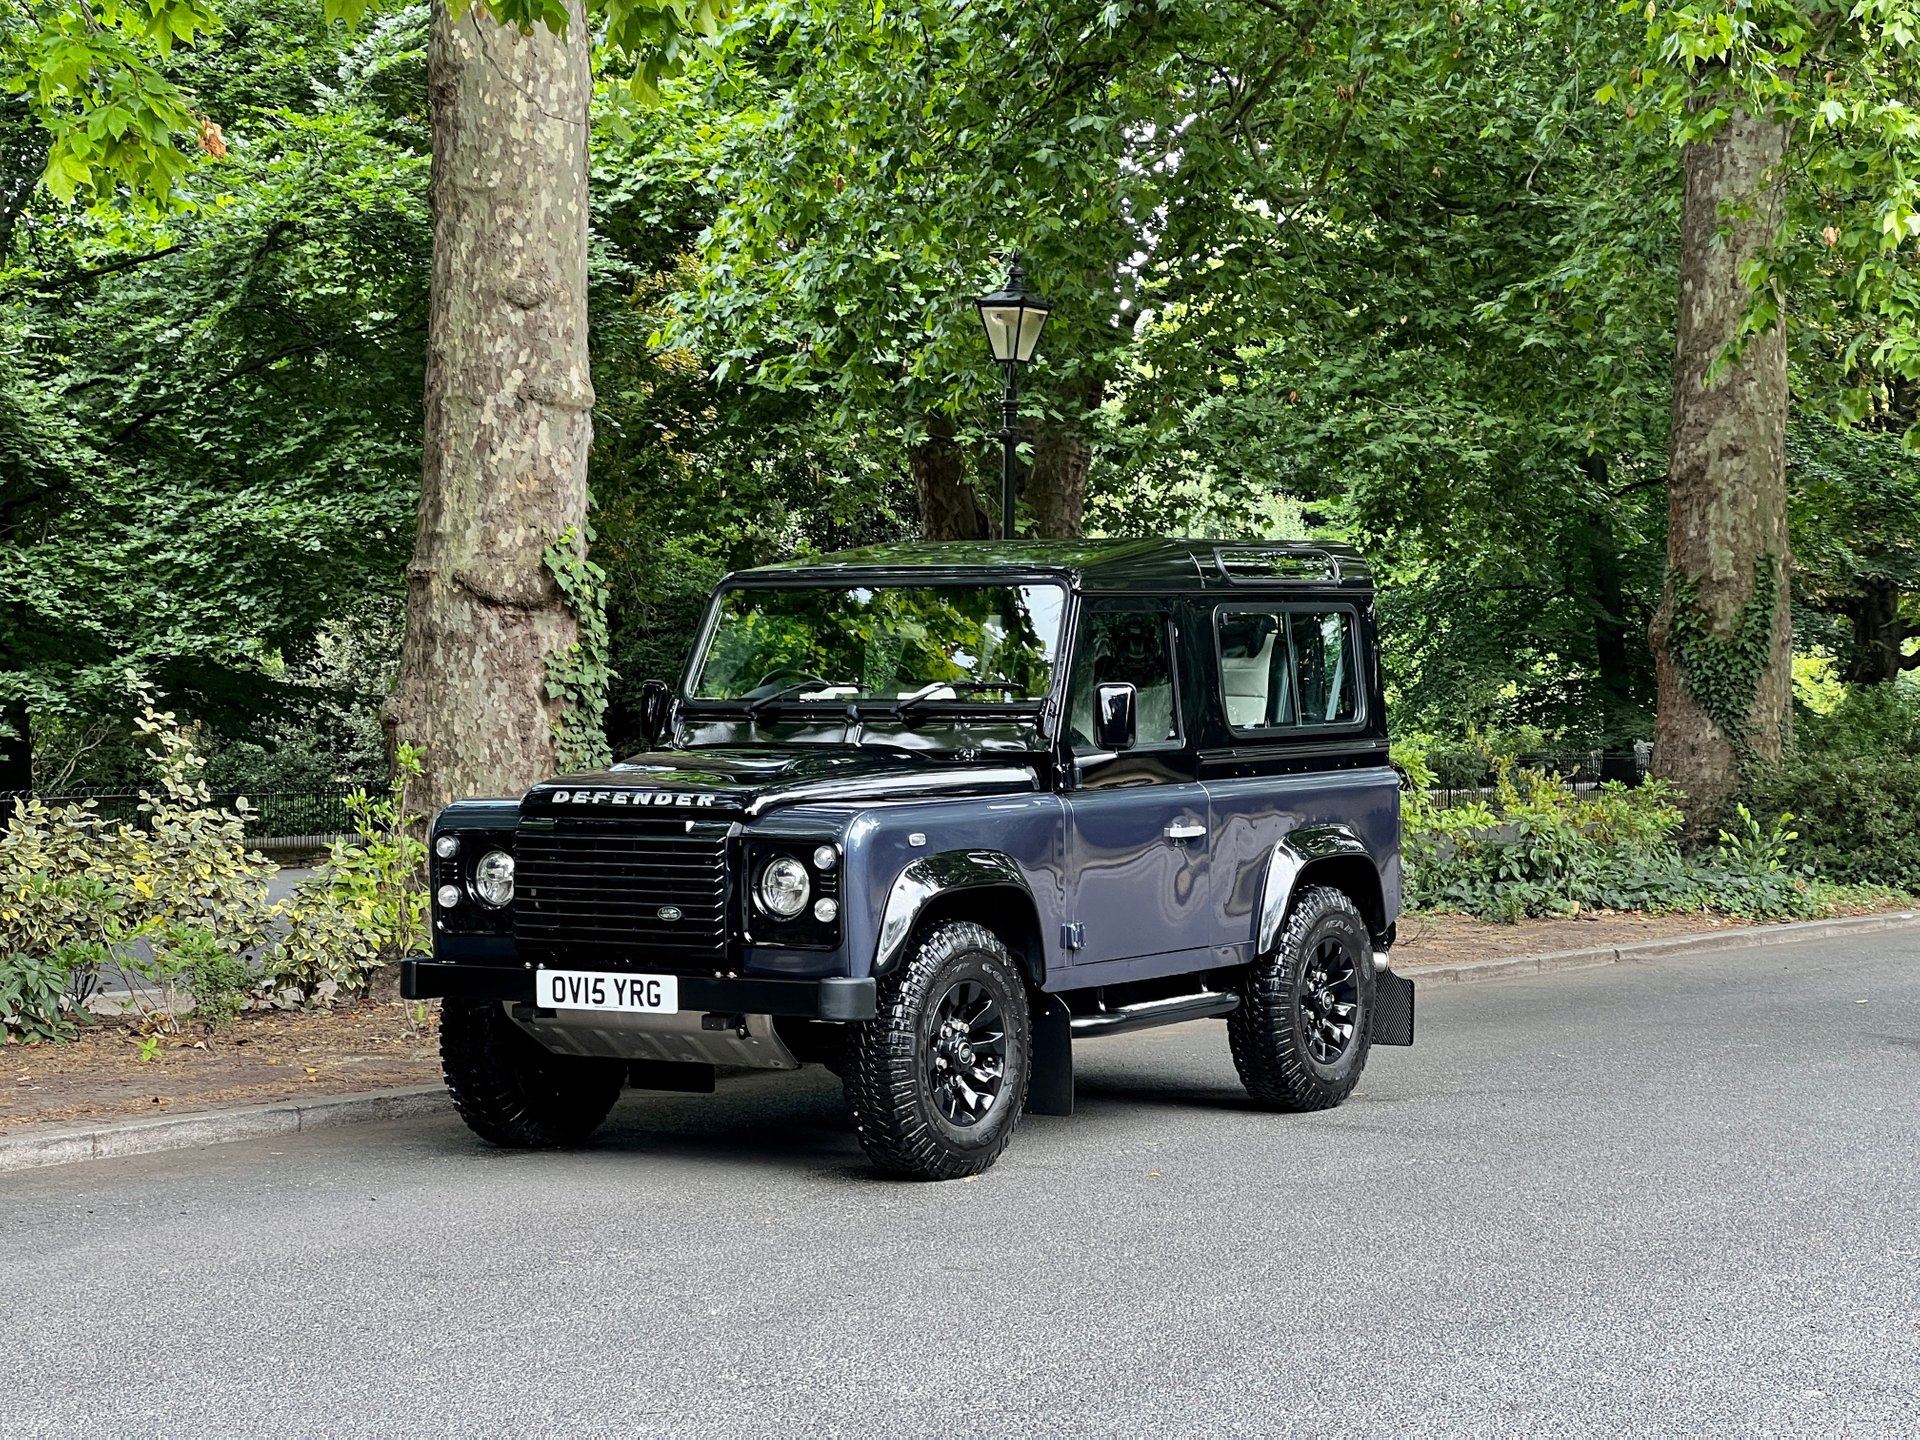 Classic Land Rover Cars for Sale